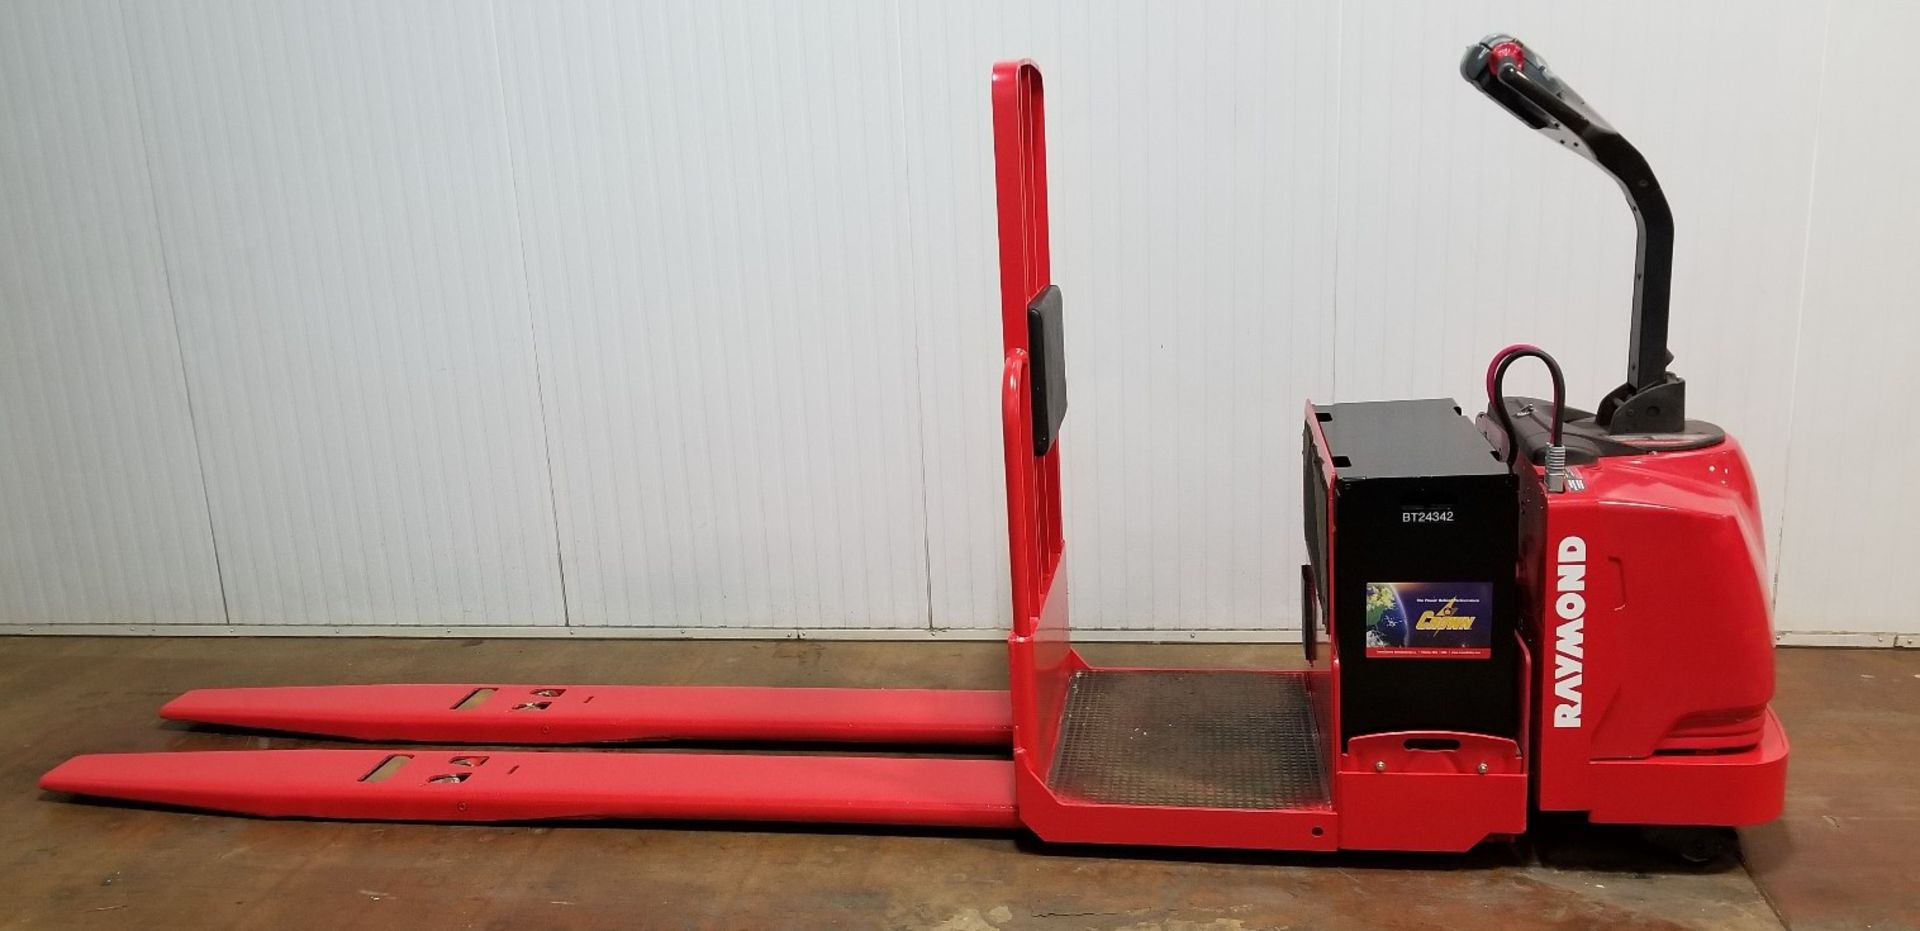 RAYMOND (2012) 8500 24V ELECTRIC RIDE-ON PALLET JACK WITH 6000 LB. CAPACITY, S/N: 850-12-83846 (UNIT